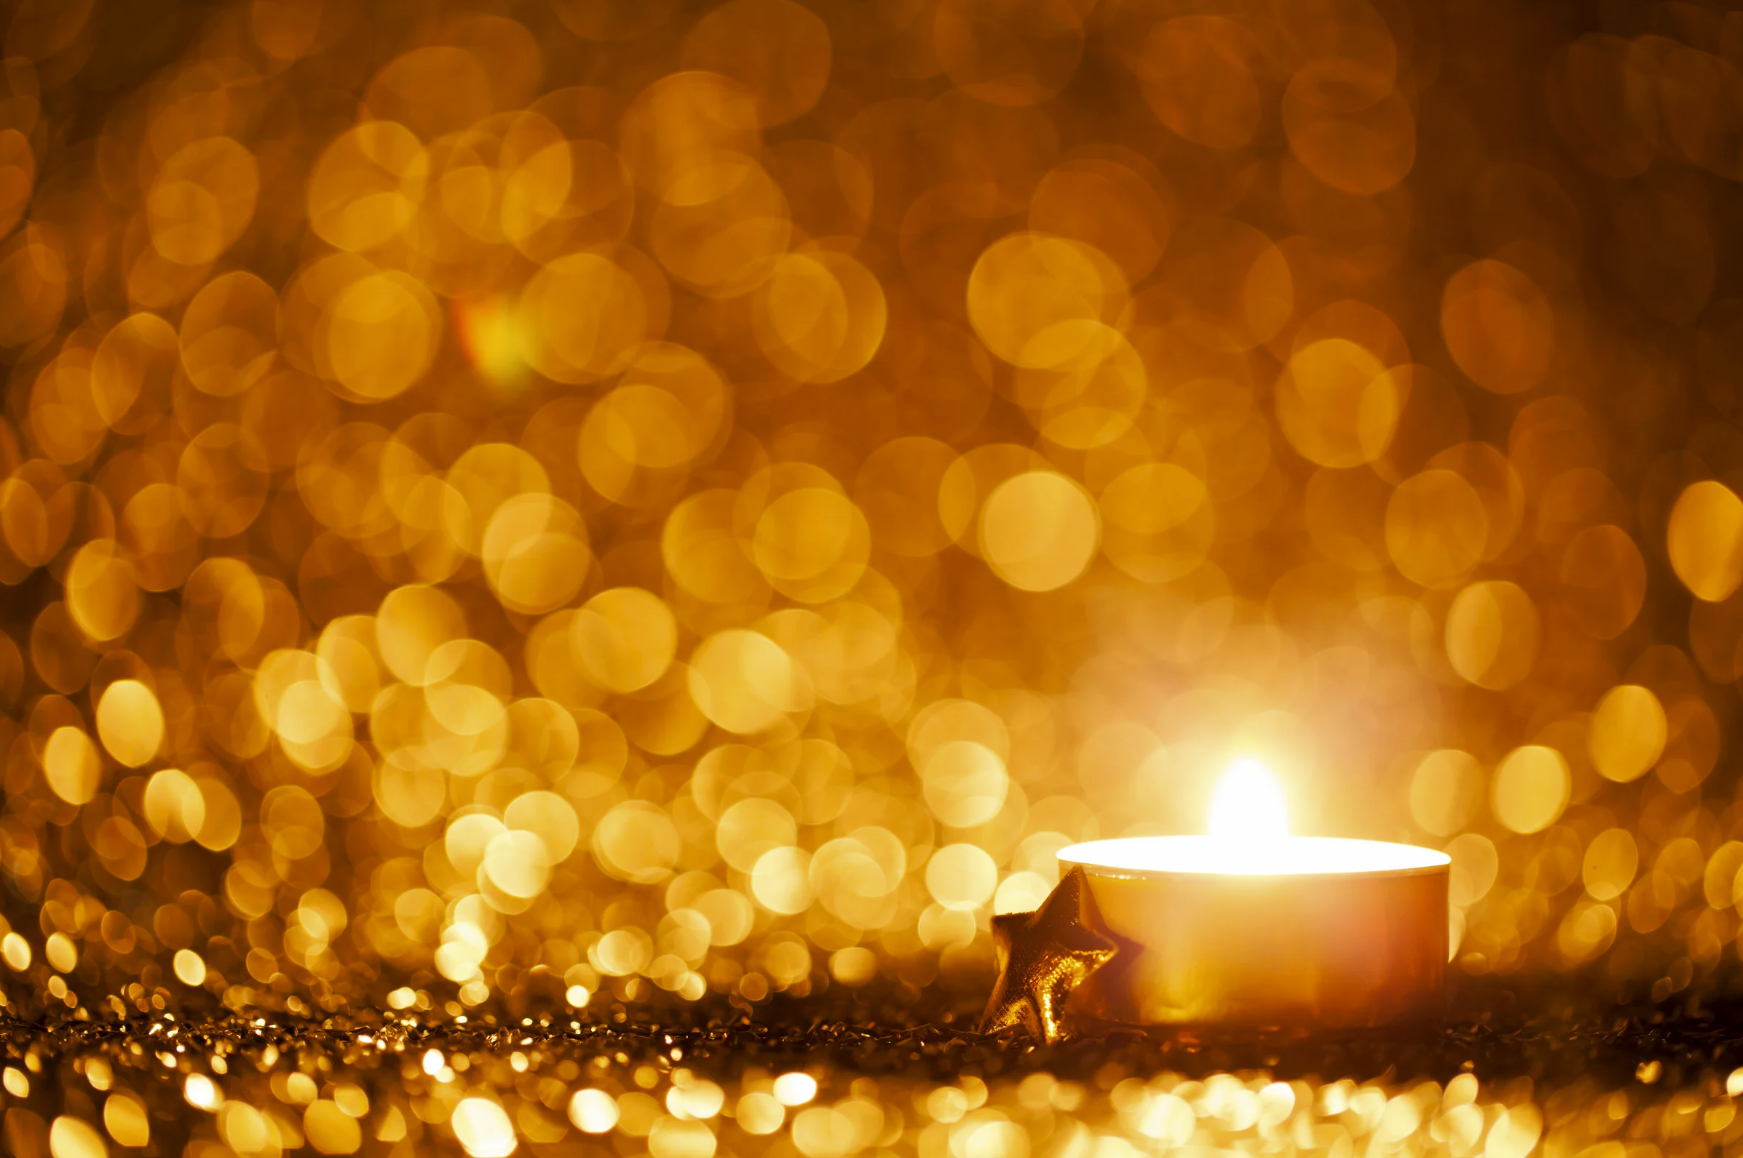 A single candle lit in a dark room - the candle is illuminating the darkness with glitter-like gold